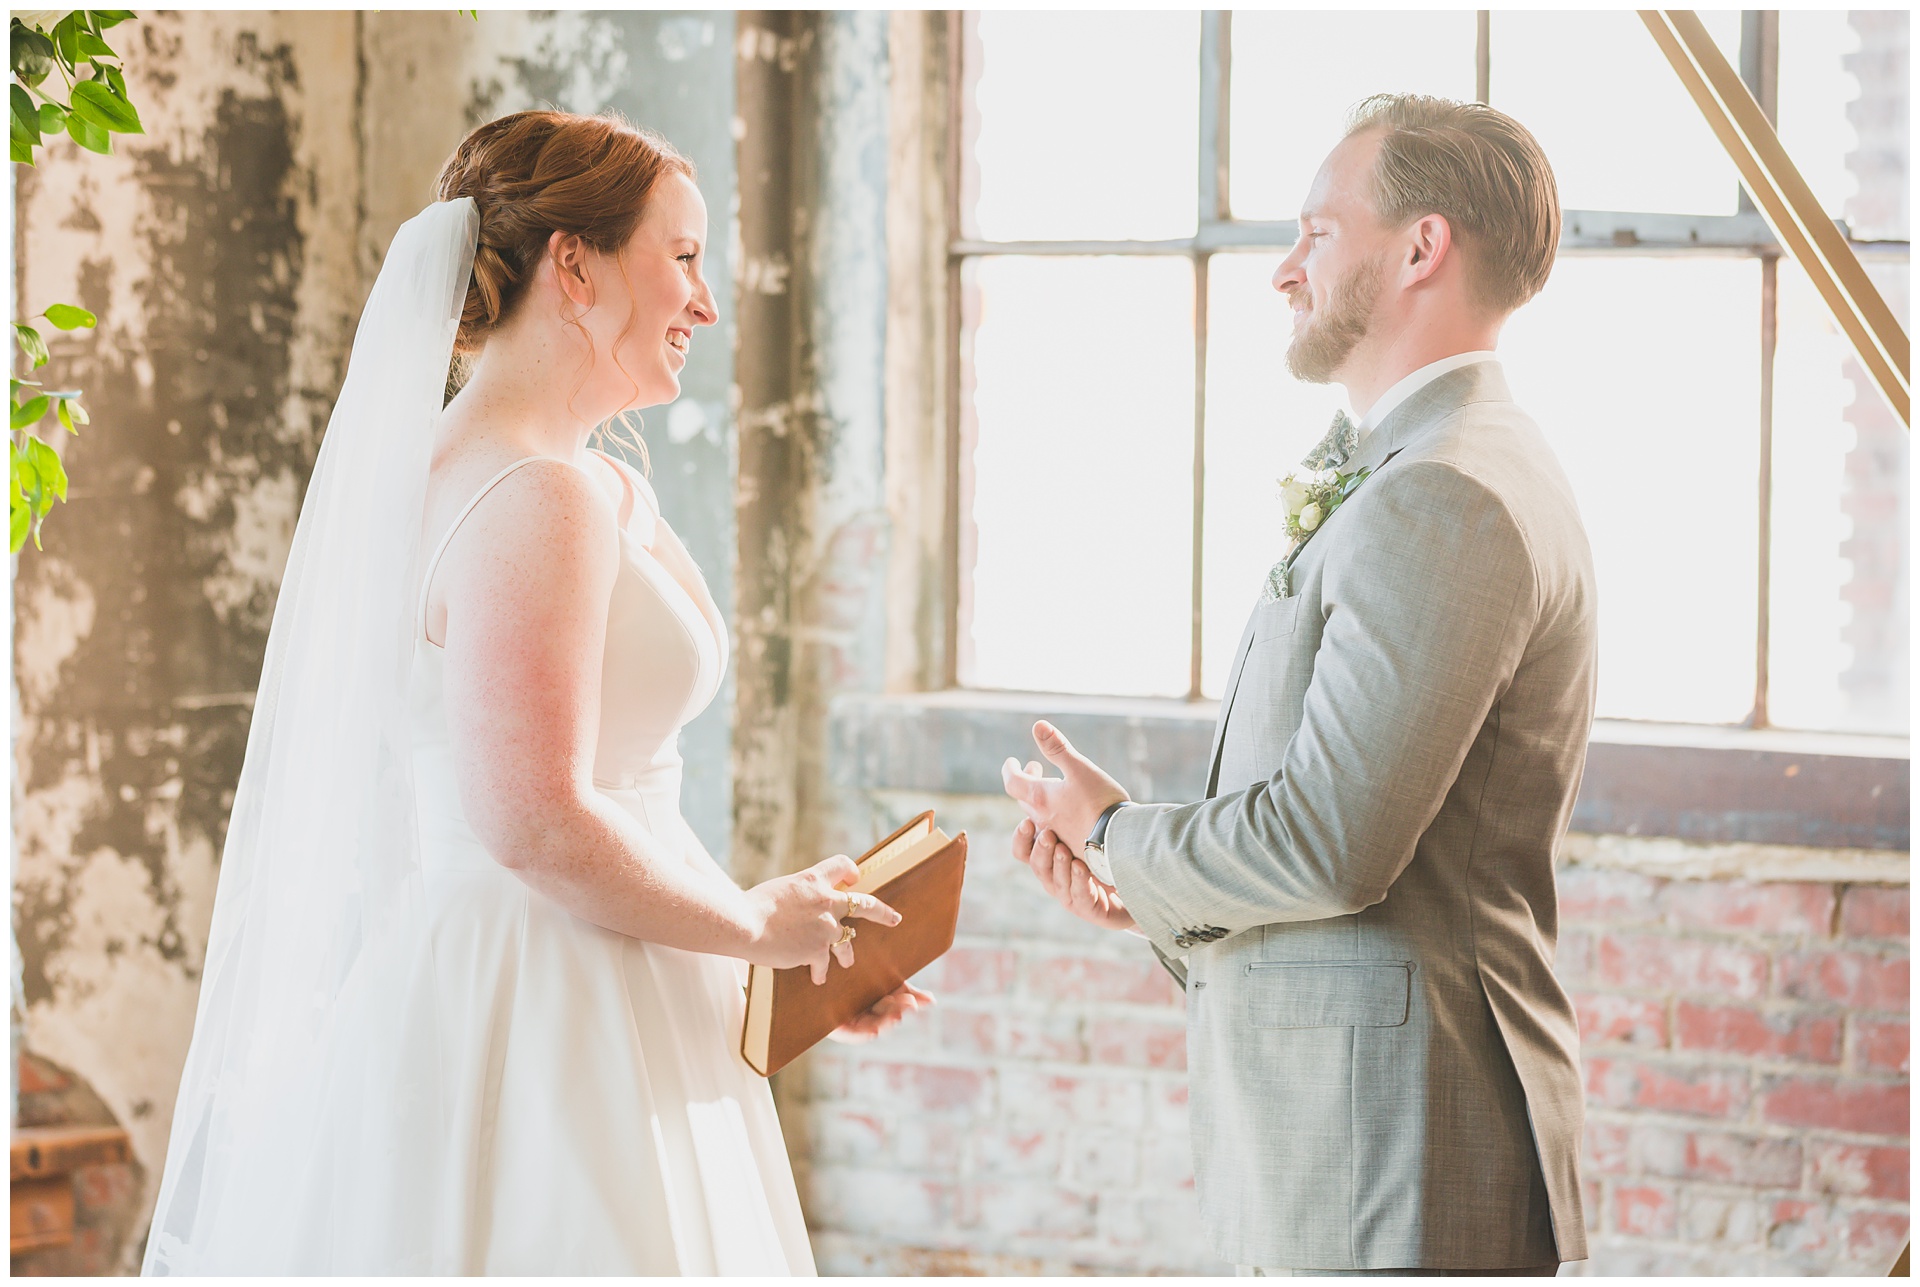 Wedding photography at The Bride and The Bauer by Kansas City wedding photographers Wisdom-Watson Weddings.